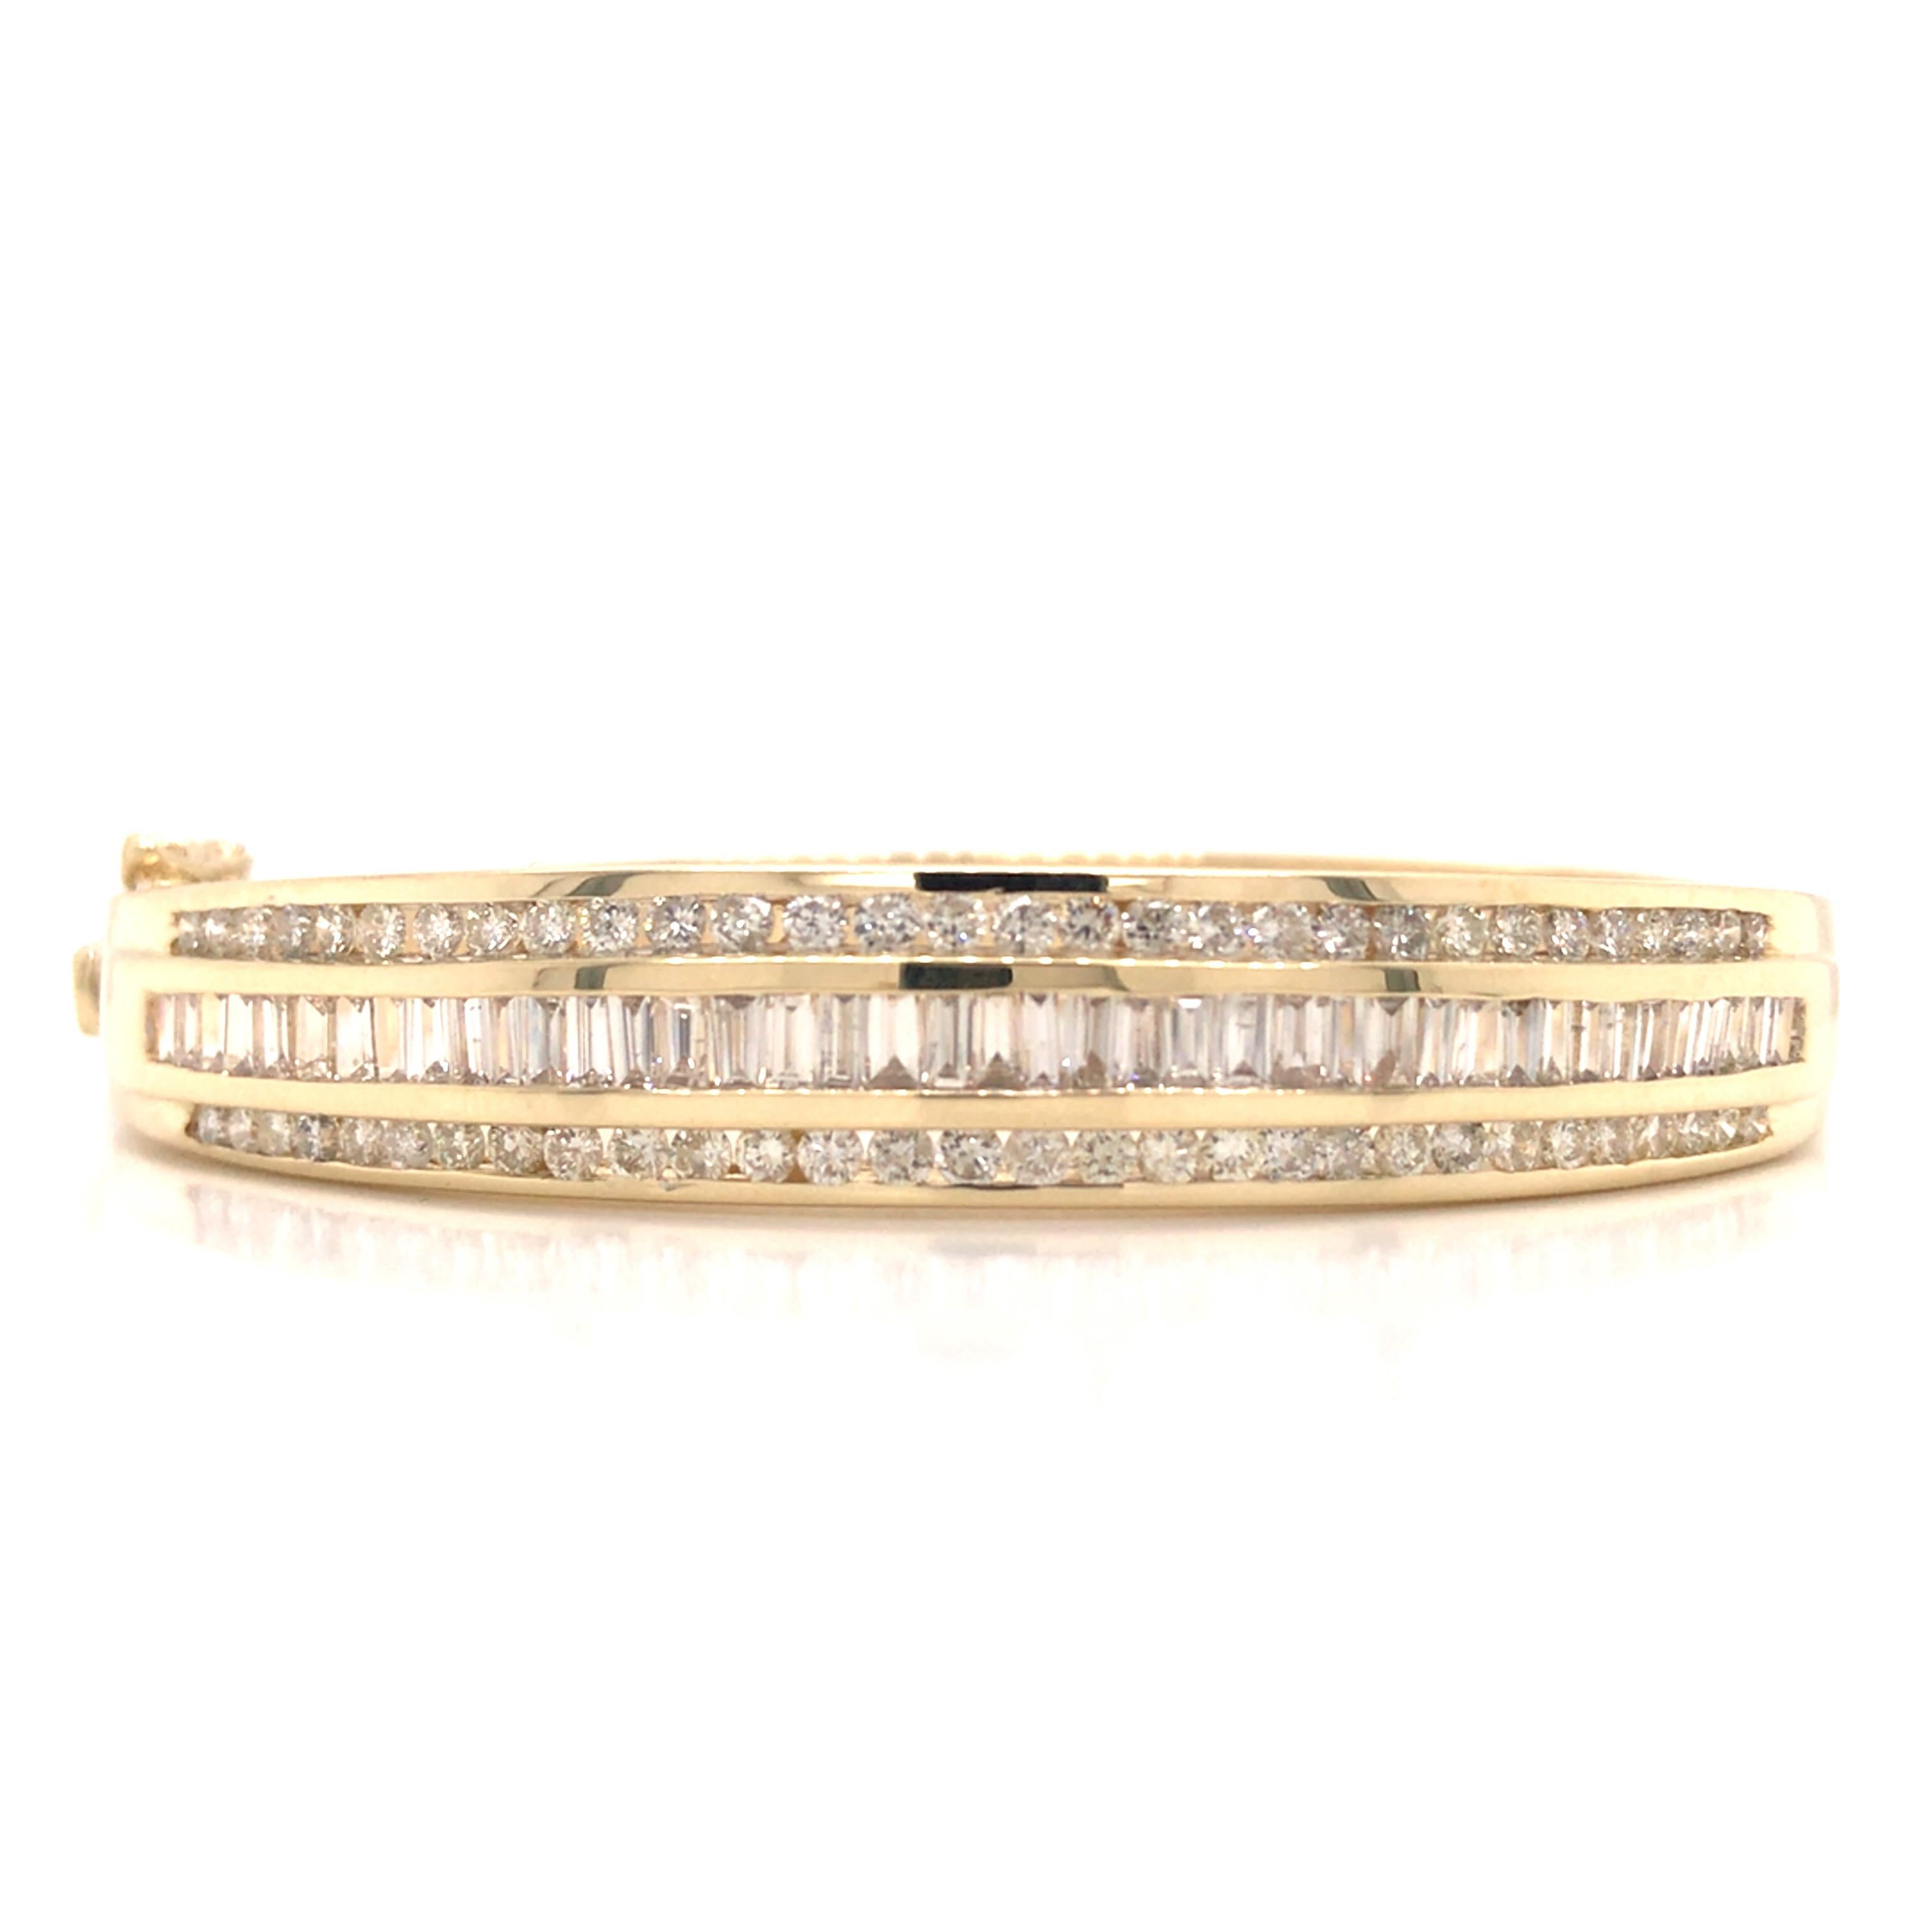 Round and Baguette Diamond Bangle Bracelet in 14K Yellow Gold.  Round Brilliant Cut and Baguette Diamonds weighing 5.0 carat total weight. G-I in color and VS-SI in clarity are expertly set.  The Bangle measures 6 3/4 inch inner circumference and